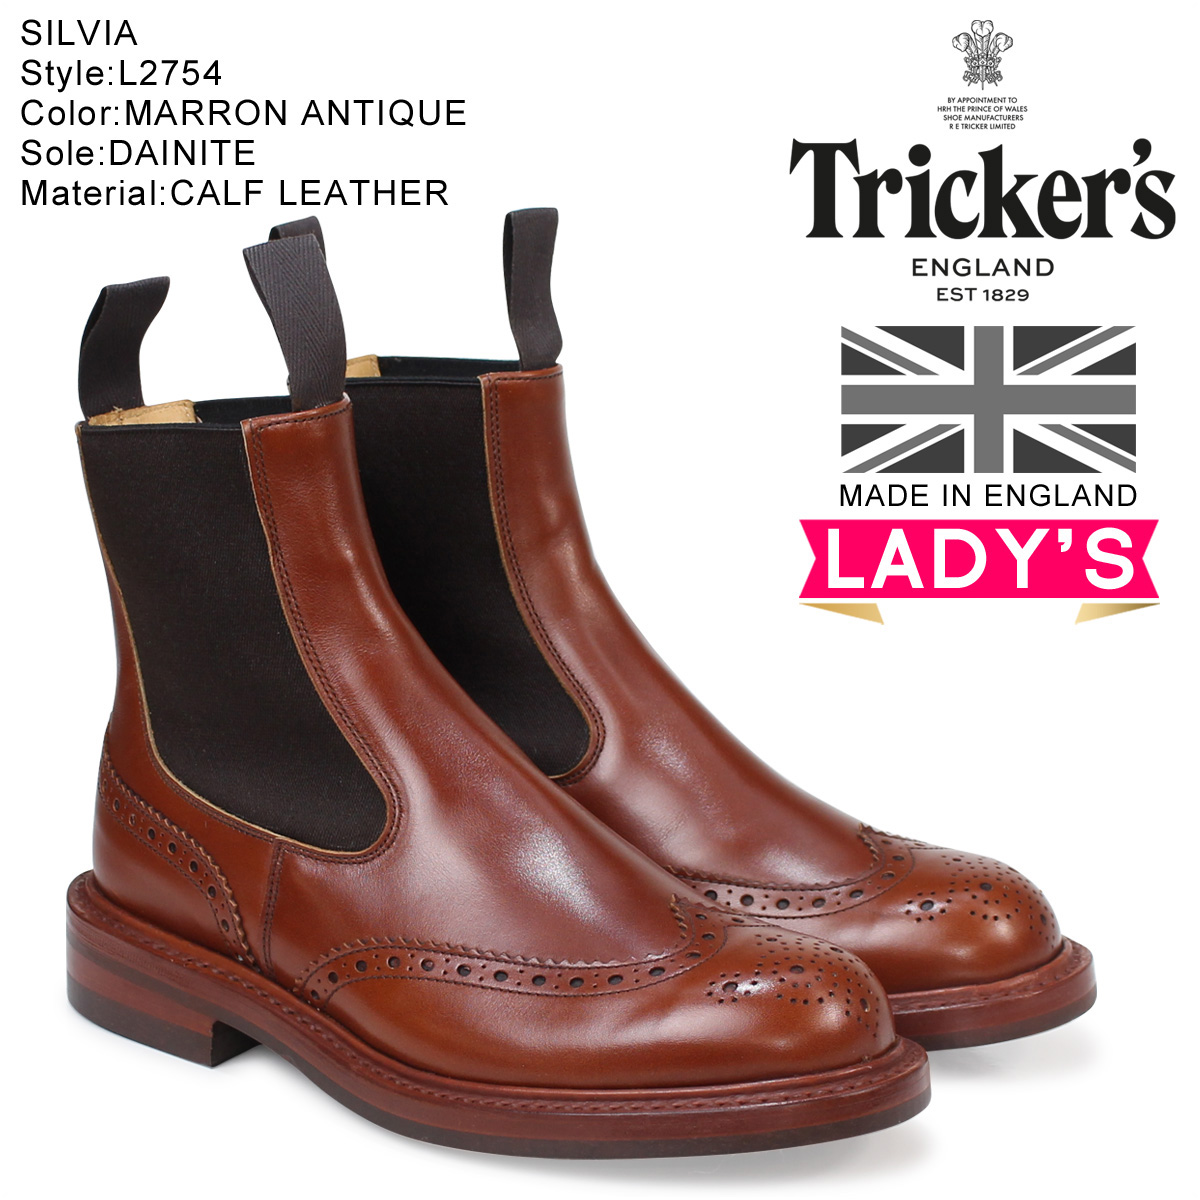 Trickers Size Chart